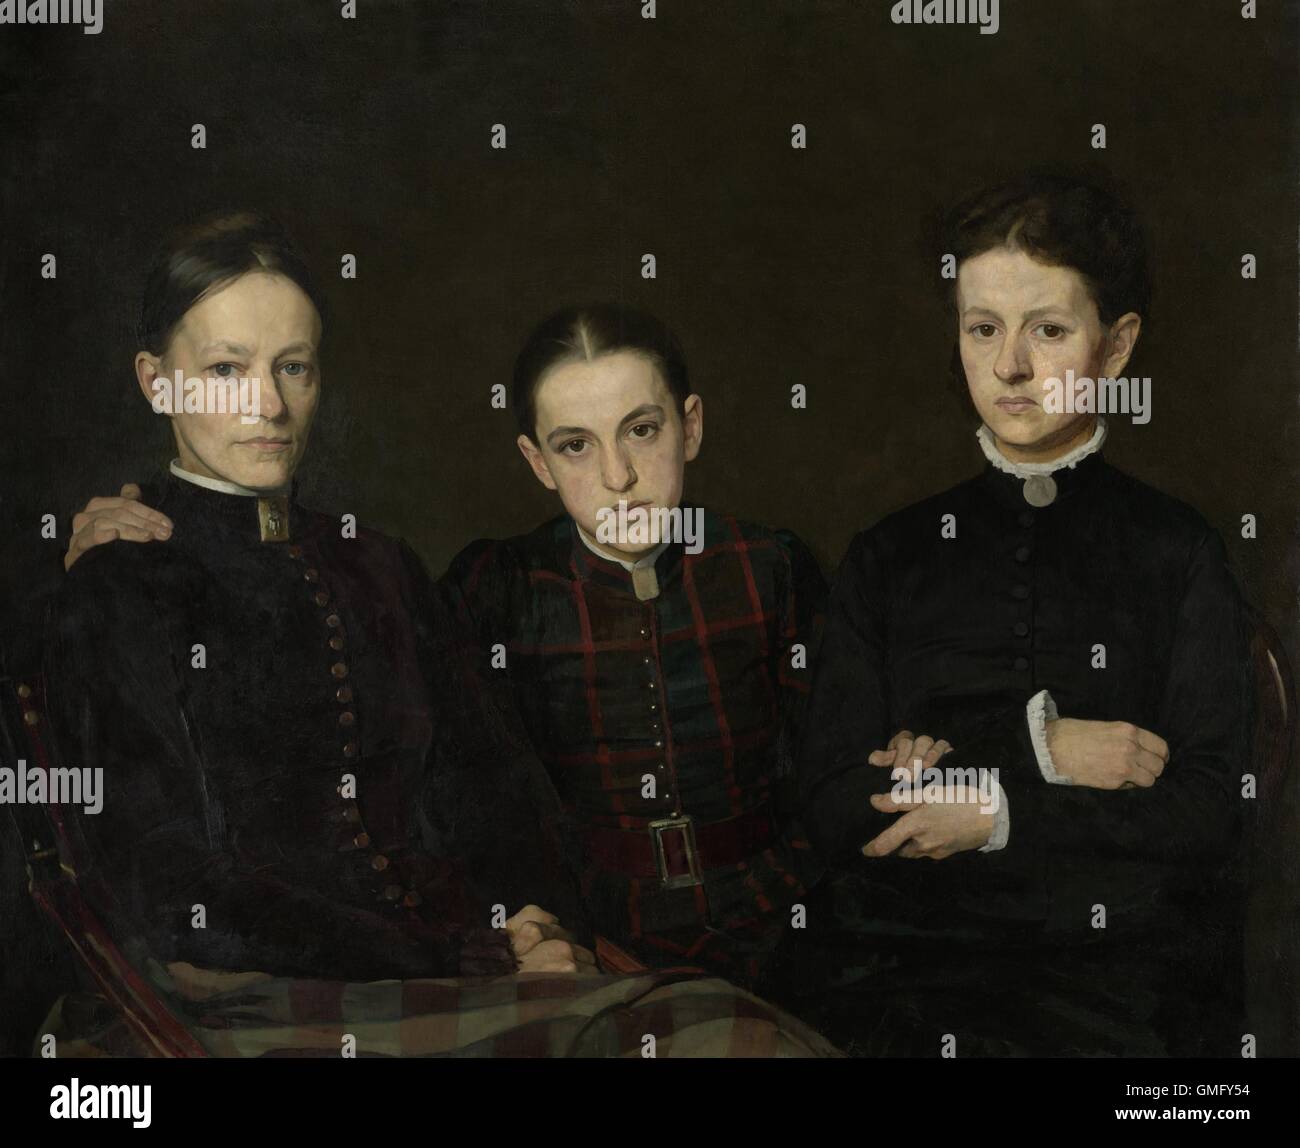 Portrait of Cornelia, Clara and Johanna Veth, by Jan Veth, 1885, Dutch painting, oil on canvas. Three sisters of the artist were depicted with unflattering realist honesty (BSLOC 2016 2 87) Stock Photo